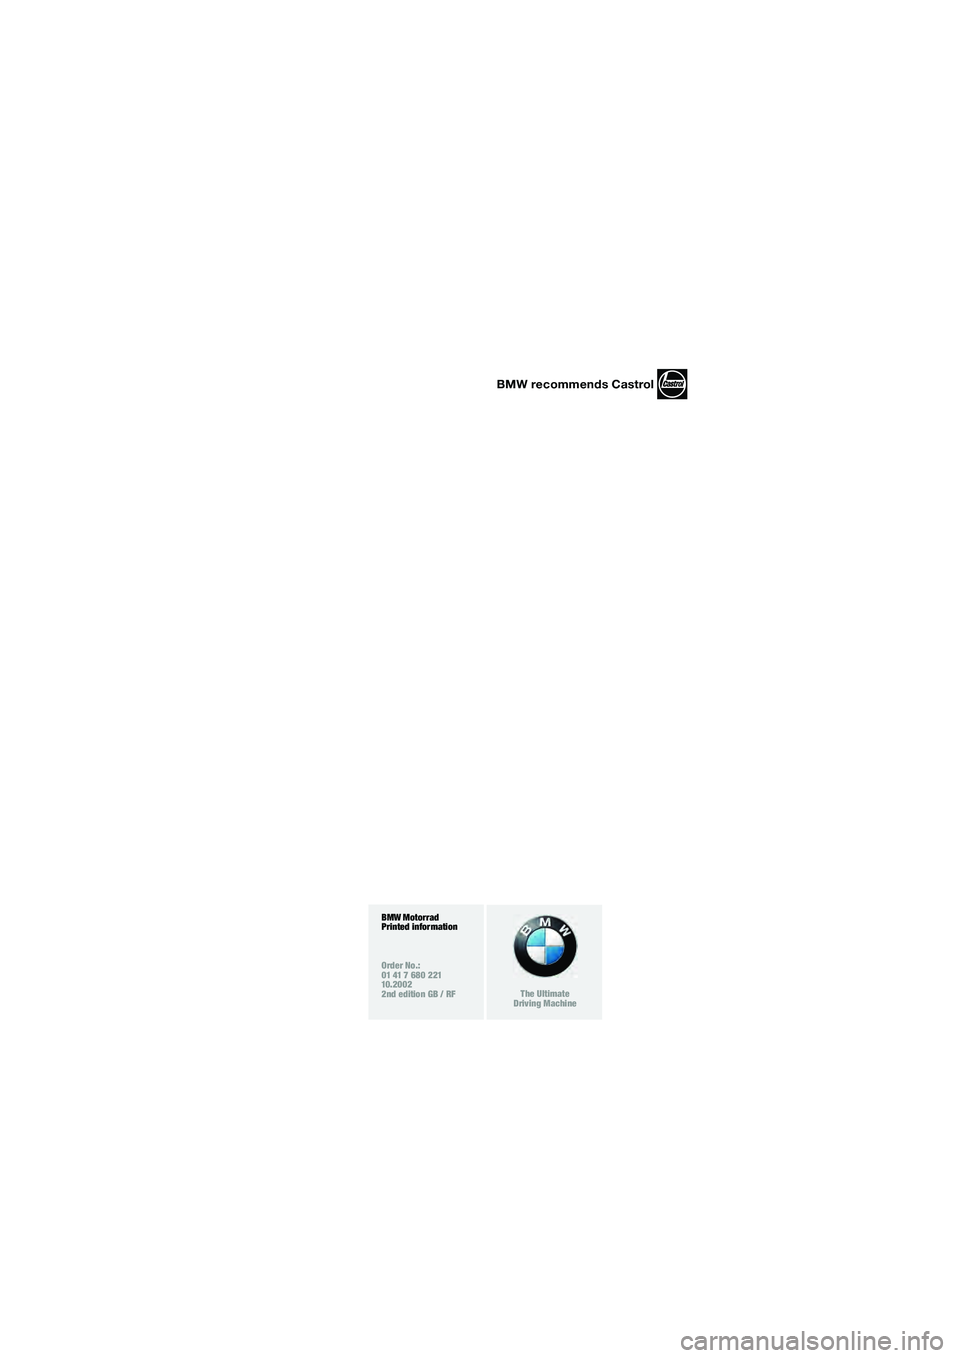 BMW MOTORRAD R 1150 RS 2002  Riders Manual (in English) 1
BMW Motorrad
Printed information
Order No.:
01 41 7 680 221
10.2002
2nd edition GB / RF
The Ultimate
Driving Machine
BMW recommends Castrol
10rsbkg2.book  Seite 89  Dienstag, 19. November 2002  4:56